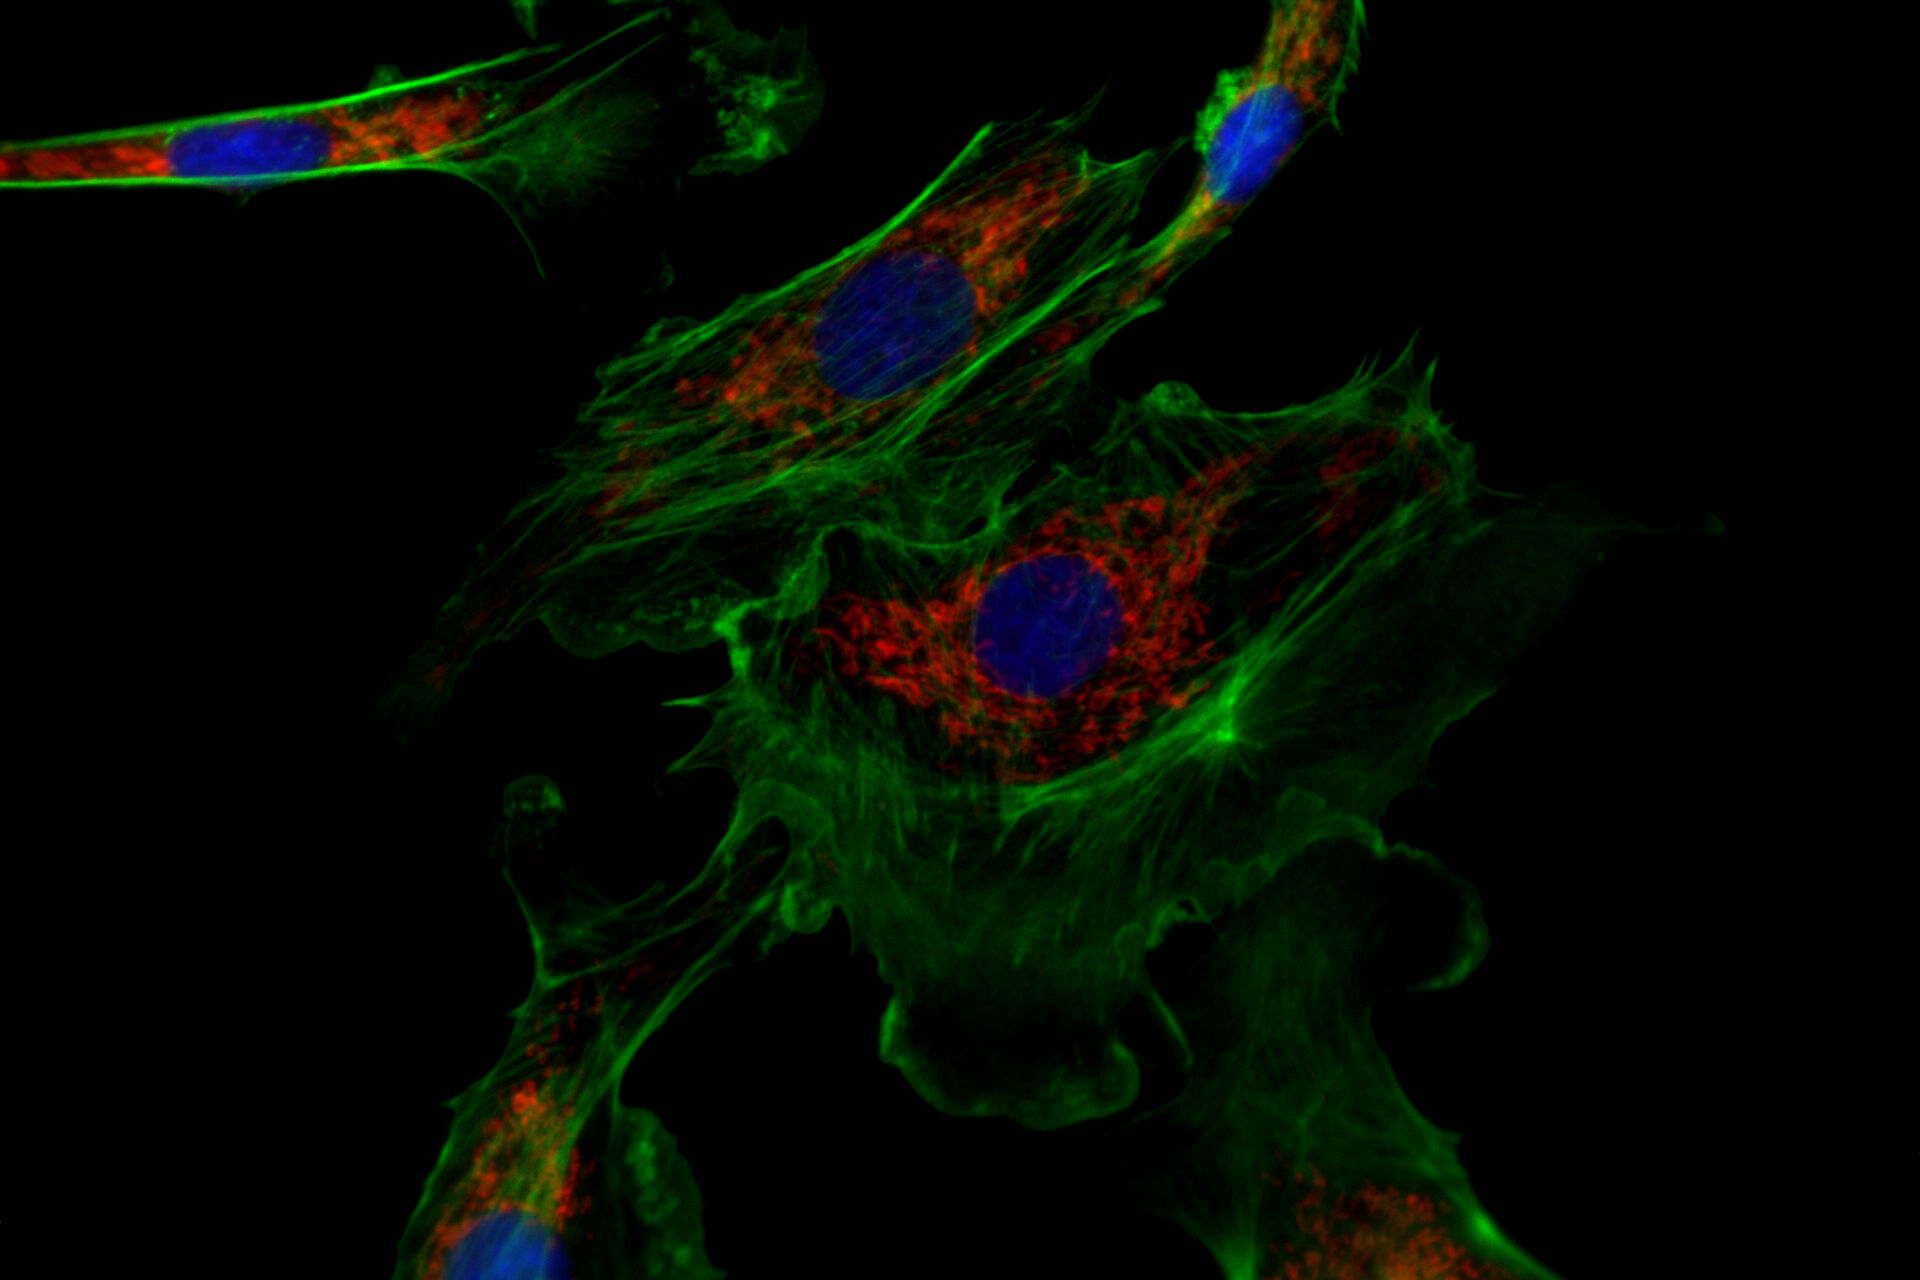 Studying Virus Replication with Fluorescence Microscopy